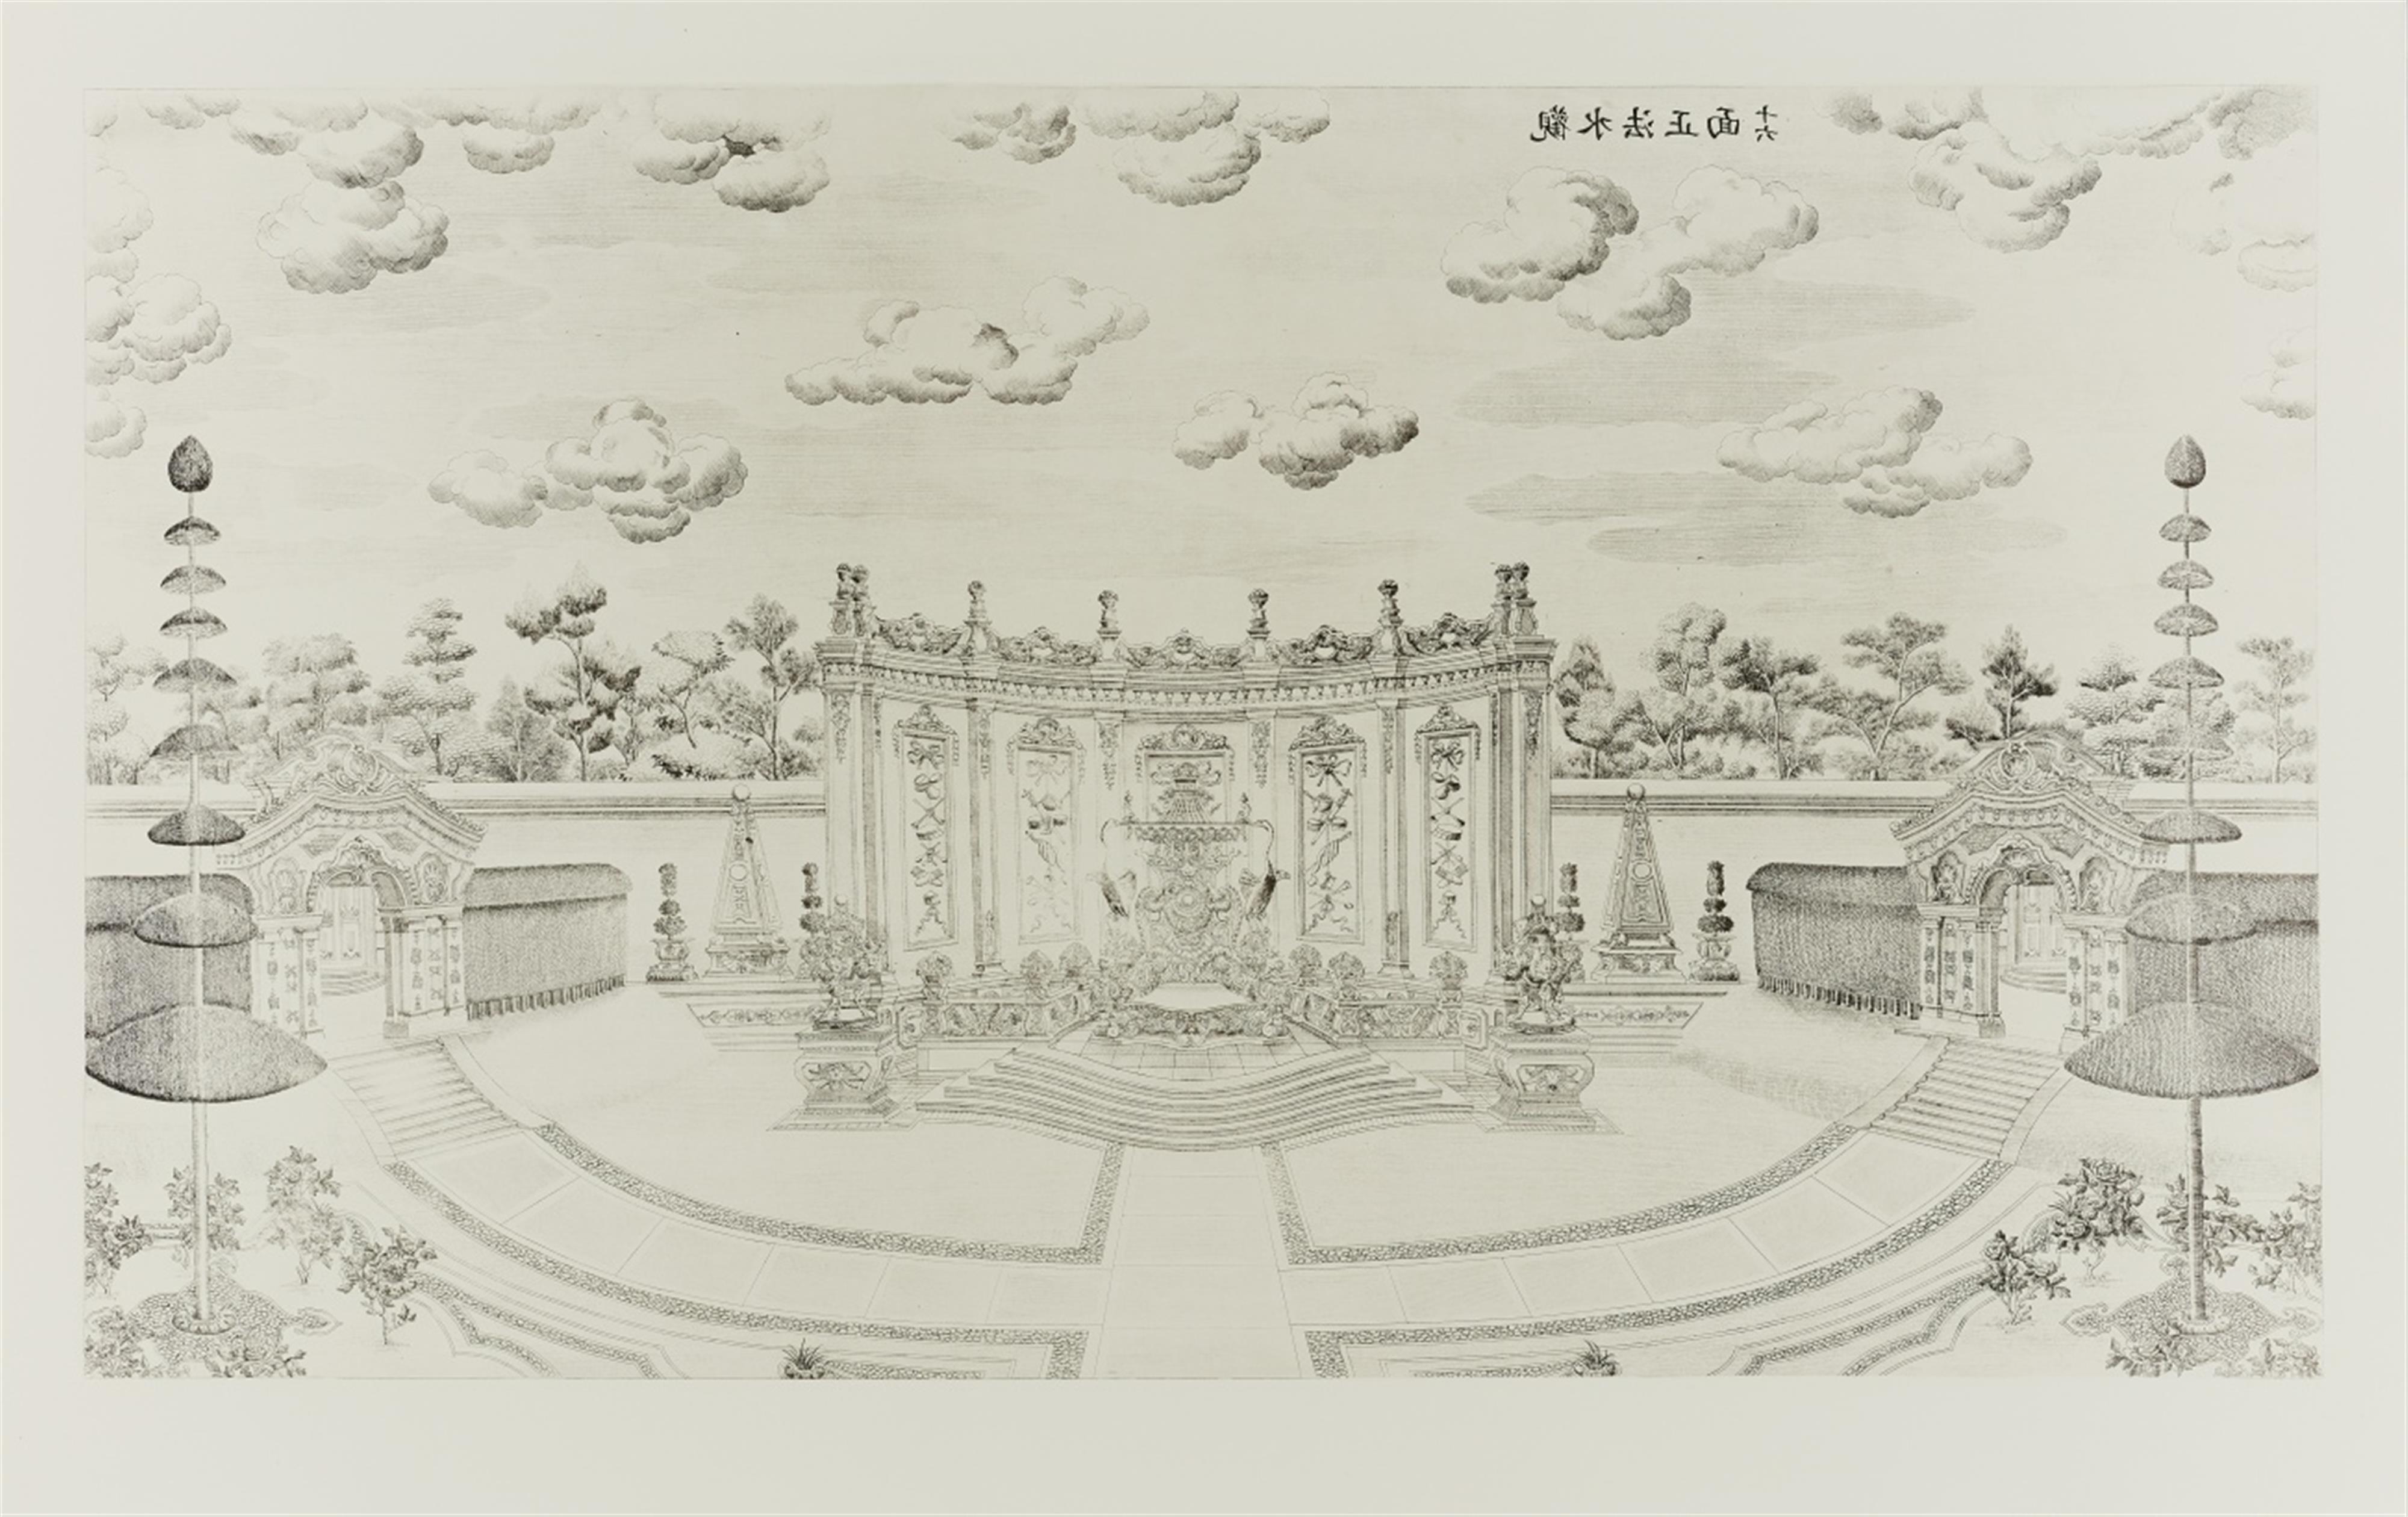 After Yi Lantai . 20th century - Sixteen etchings on wove paper depicting palaces, pavilions and gardens created by Giuseppe Castiglione in the Xiyang Lou (Western mansions) on the imperial grounds of the Old S... - image-14